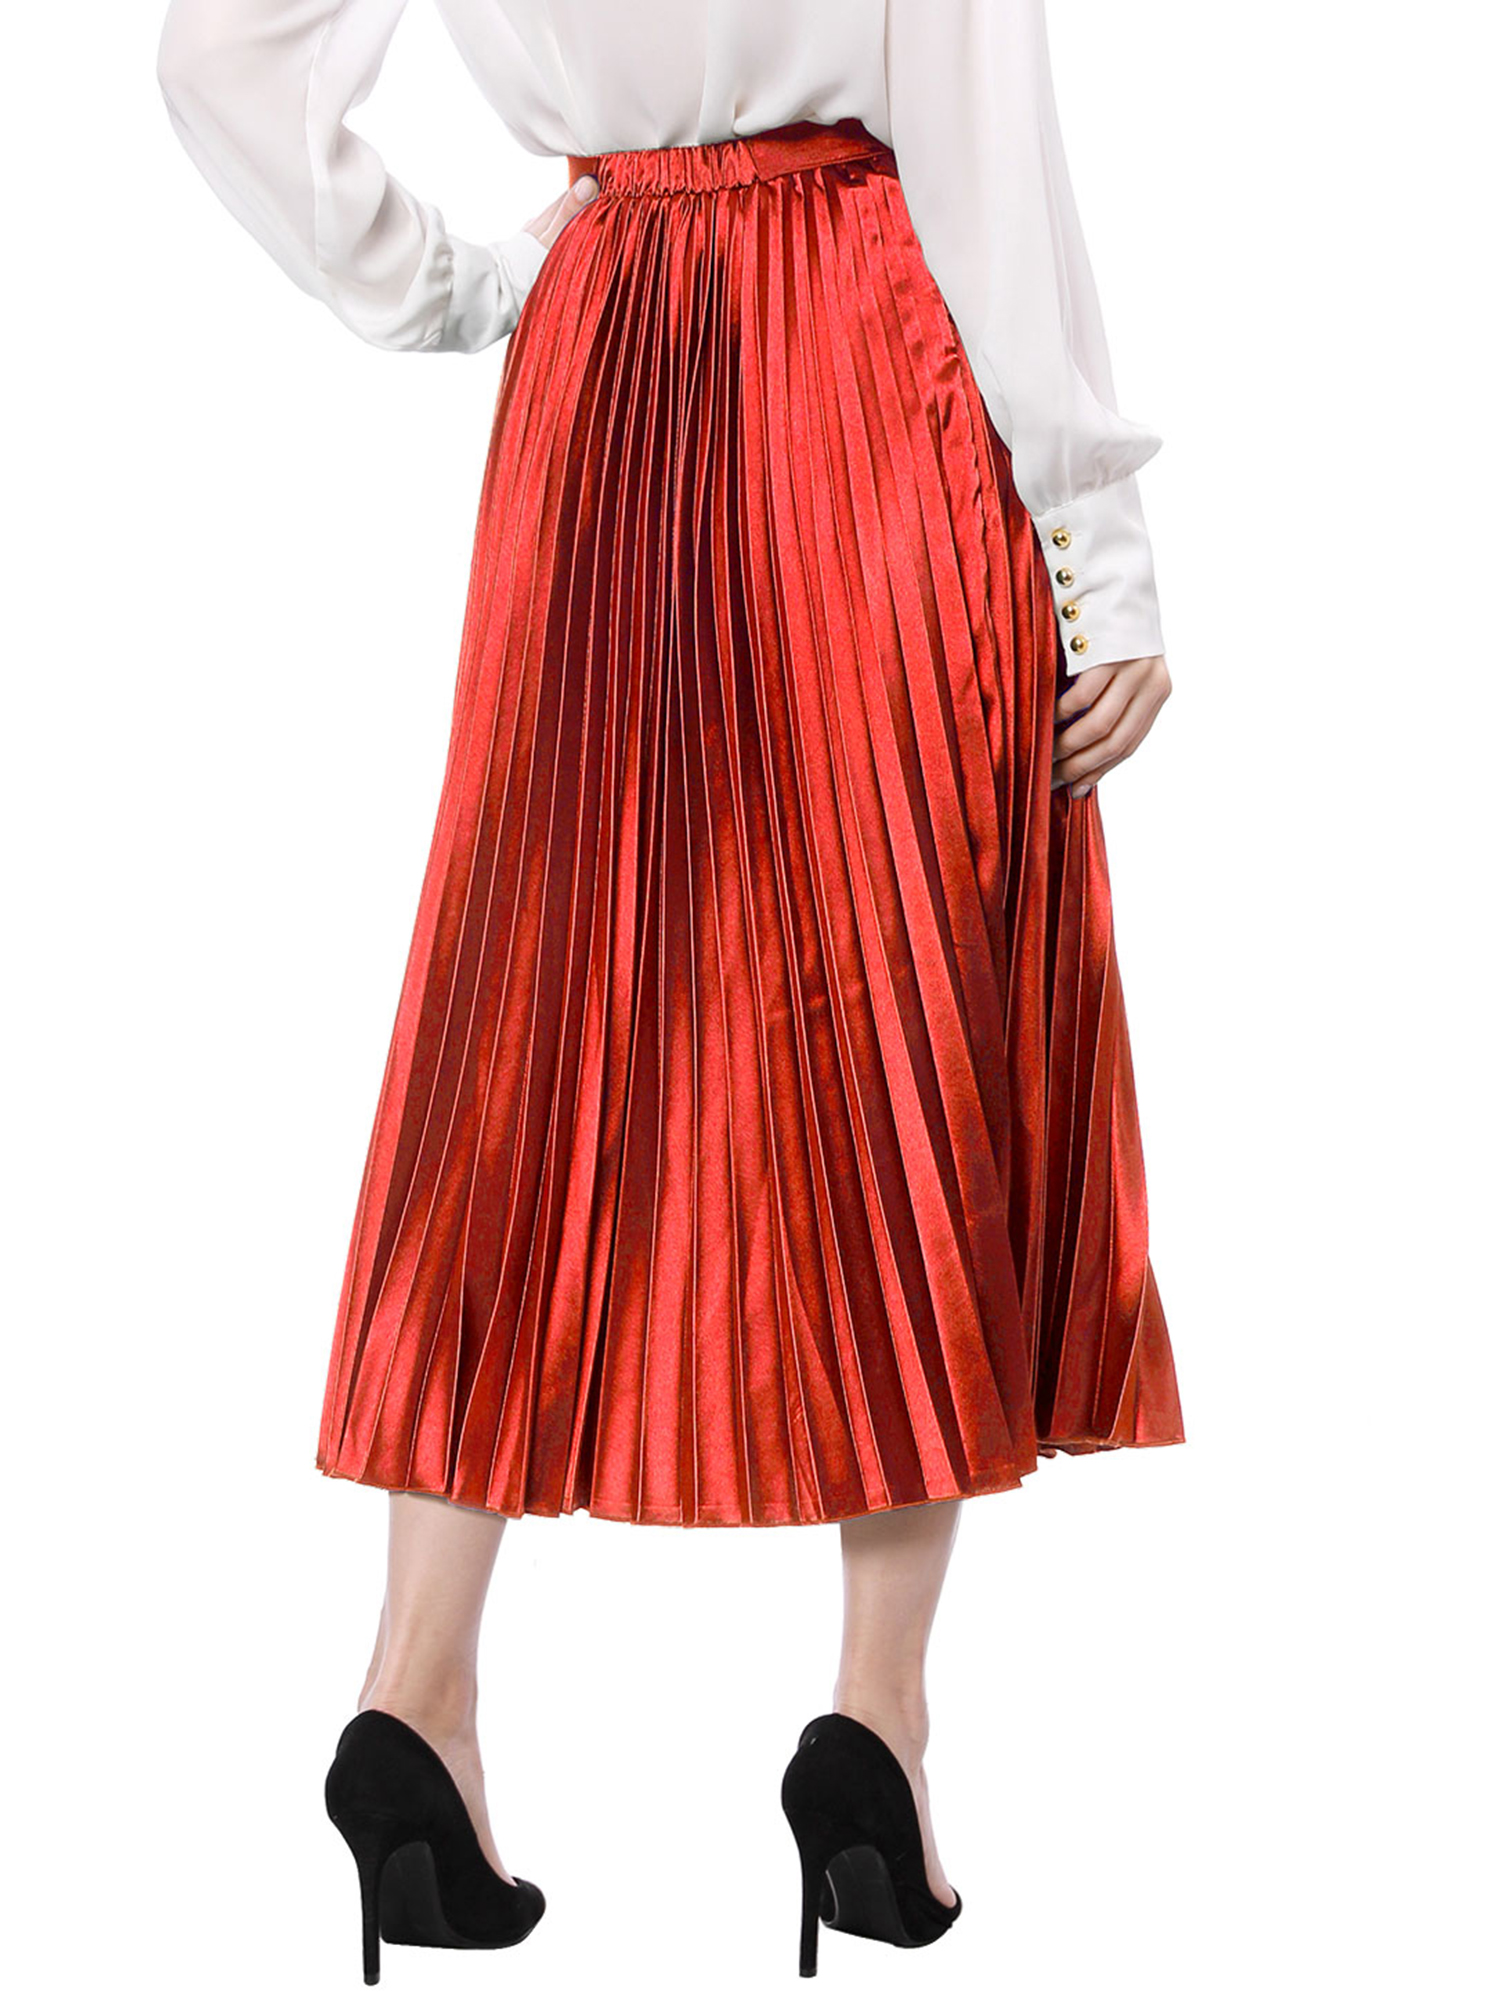 Unique Bargains Women's Halloween Costume A-line High Waist Pleated Midi Skirt L Red - image 4 of 8